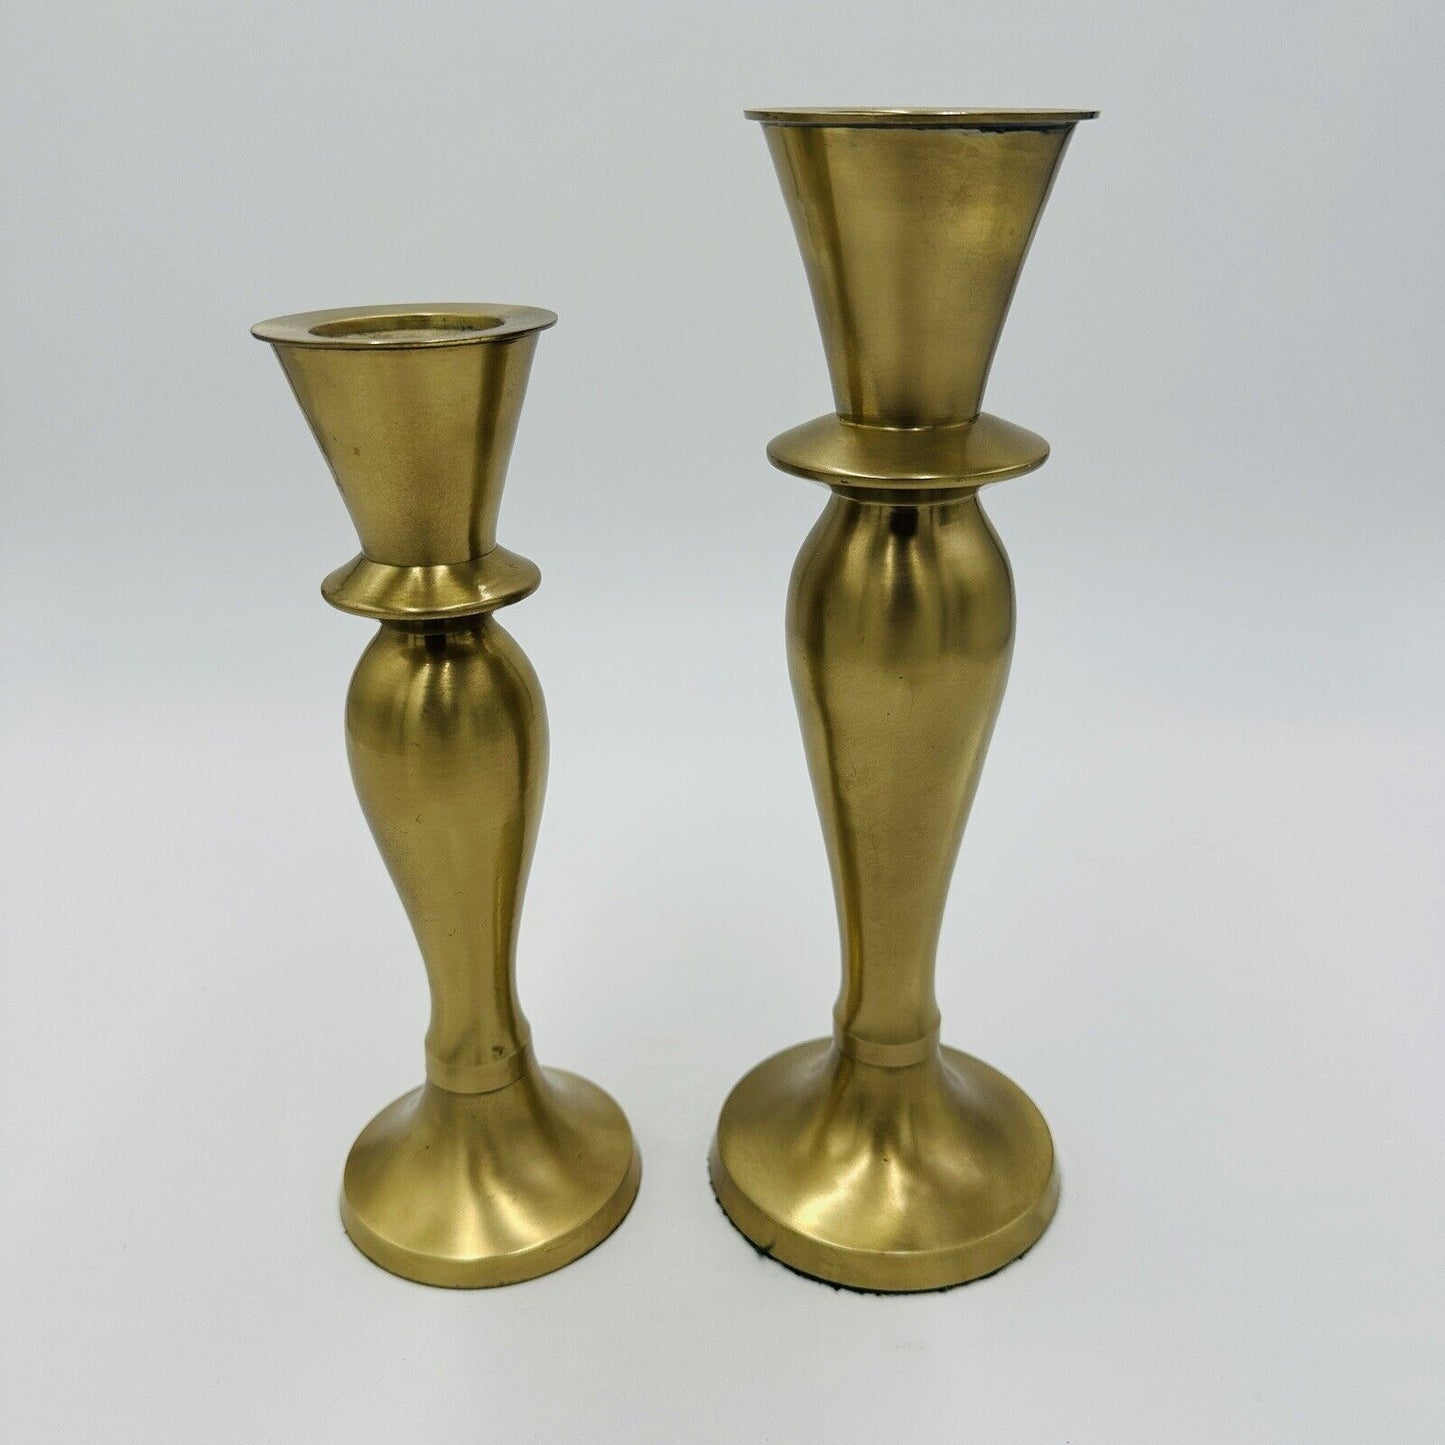 2 Brass Candleholders Tabletop IHI Solid Made In India Large Vintage Dining